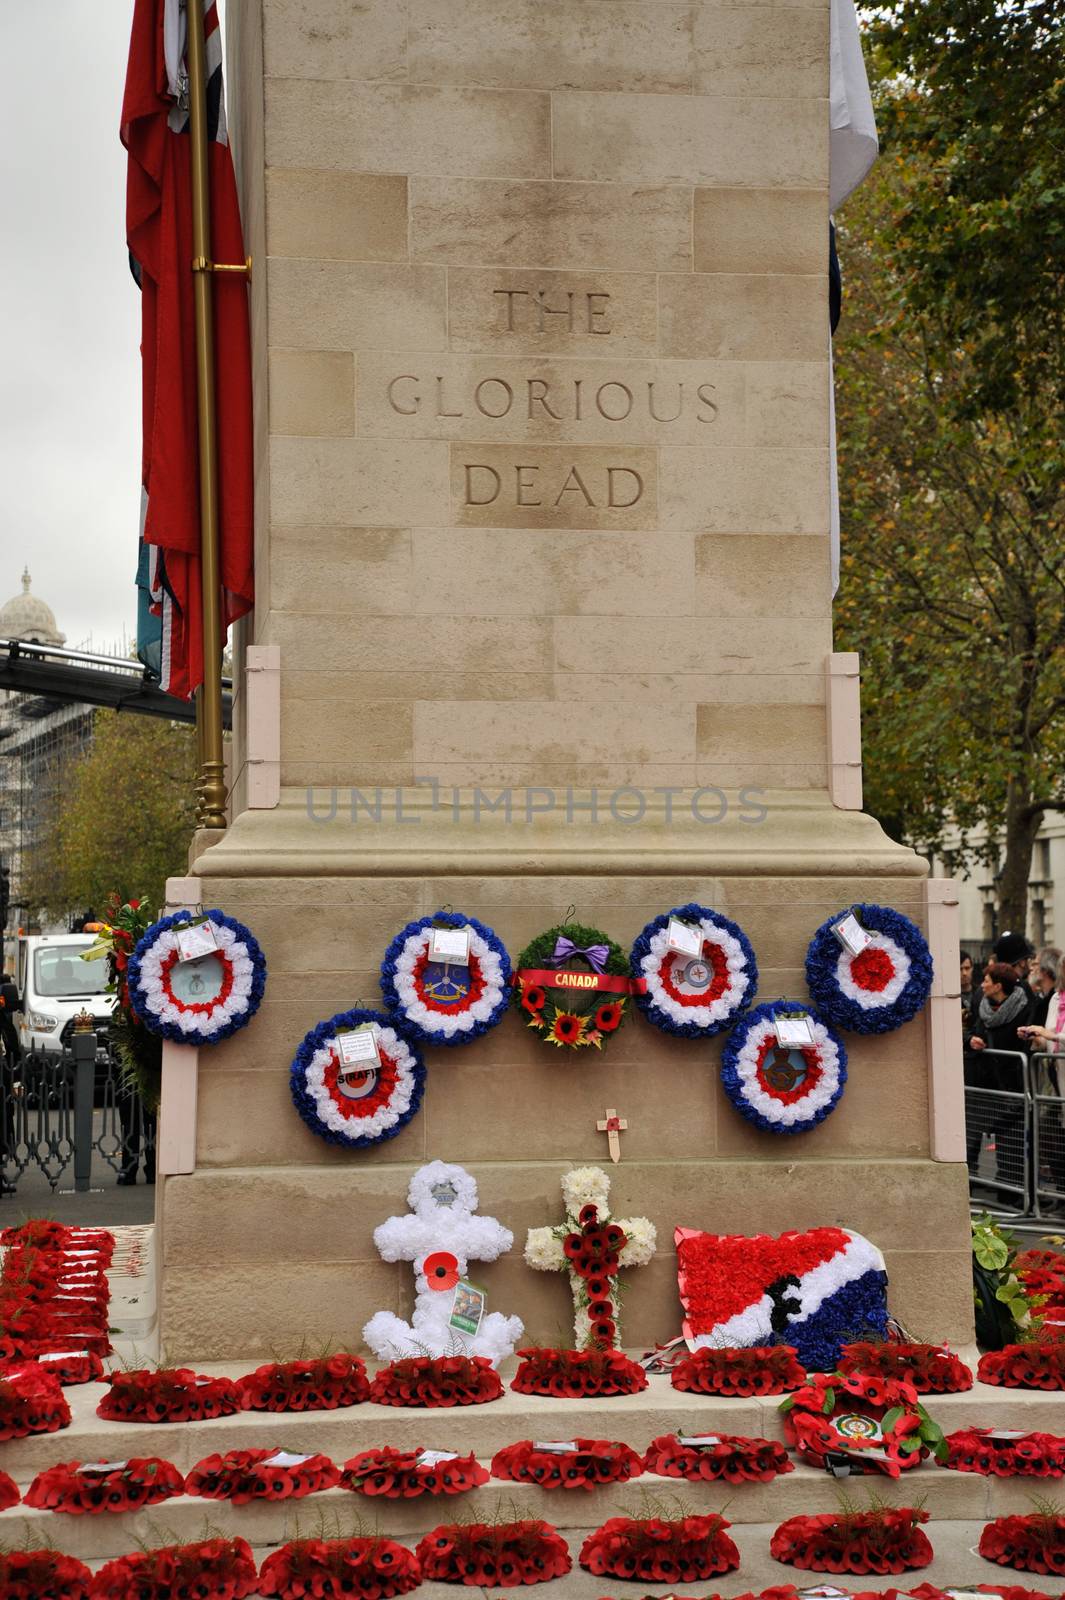 UK, London: Wreaths are laid at the Cenotaph on Whitehall for Remembrance Sunday on November 8, 2015. Both political leaders and members of the royal family visited the site that day during the National Service of Remembrance, honoring those who were killed in combat during World War II and after.